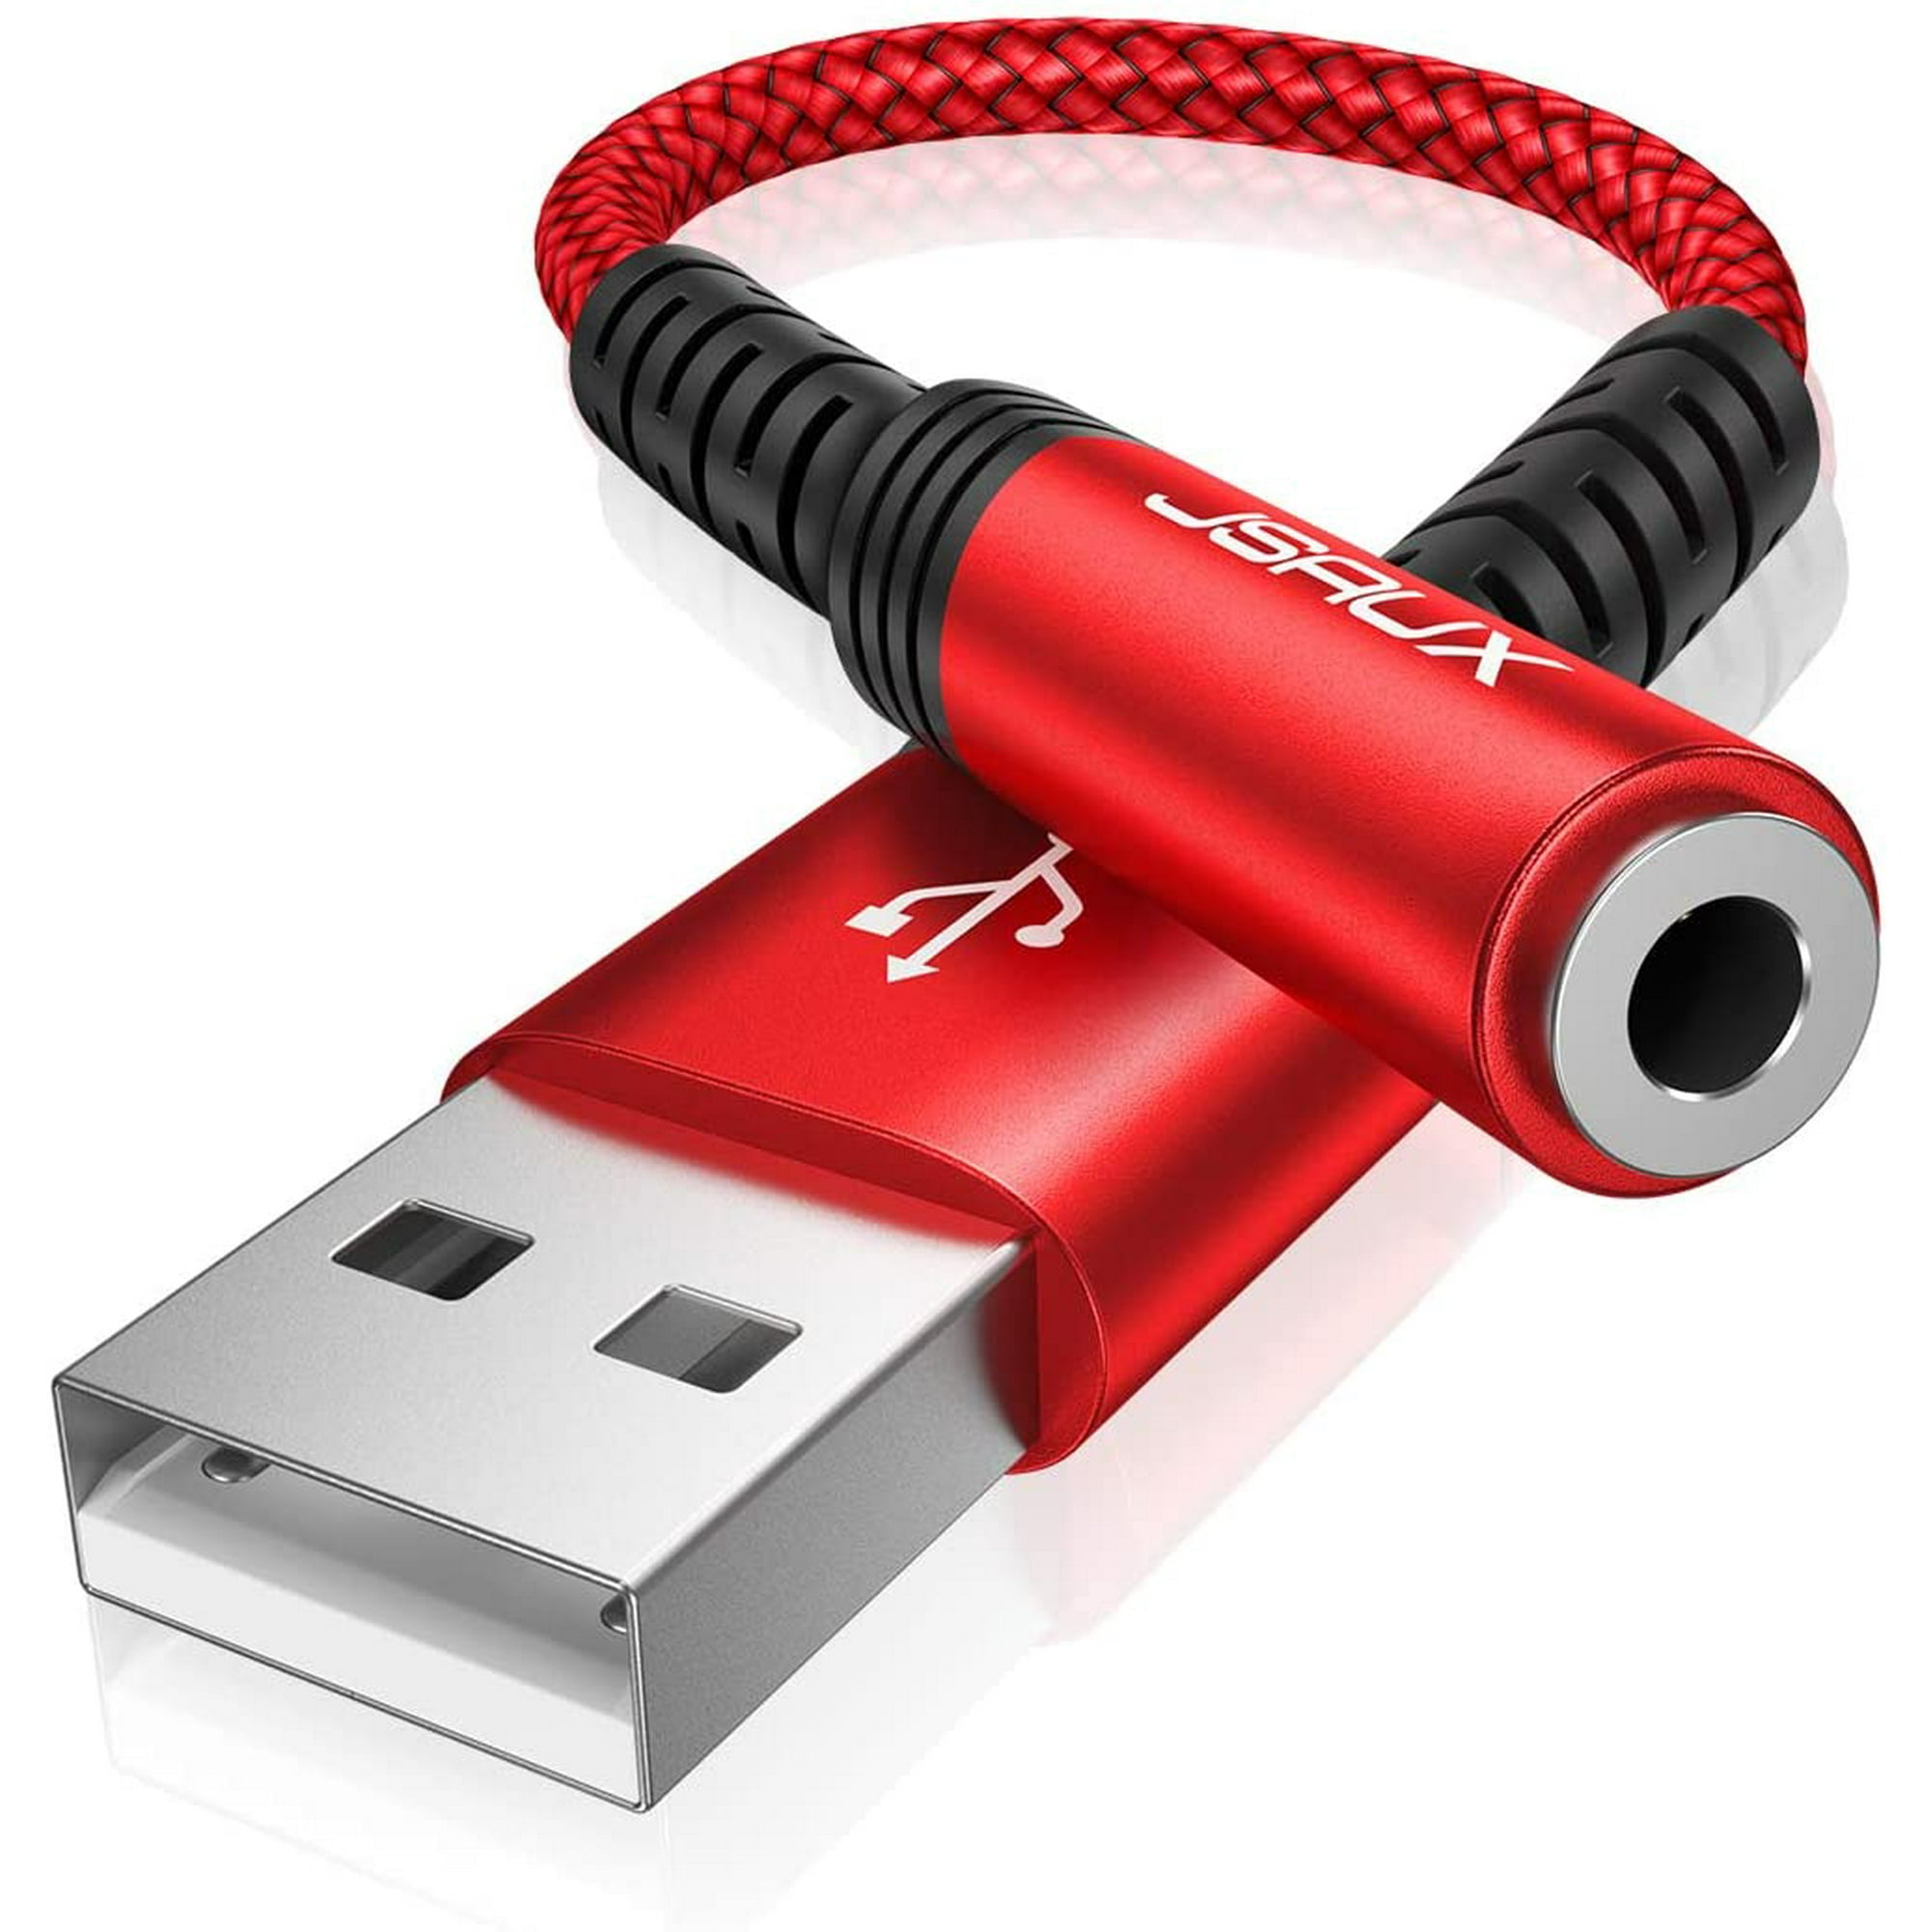 USB to 3.5mm Jack Audio Adapter, USB to Audio Jack Adapter USB-A to 3.5mm TRRS 4-Pole External Stereo Sound Card for Headphone, PS4, PC, Laptop, Desktops -Red/0.6FT |